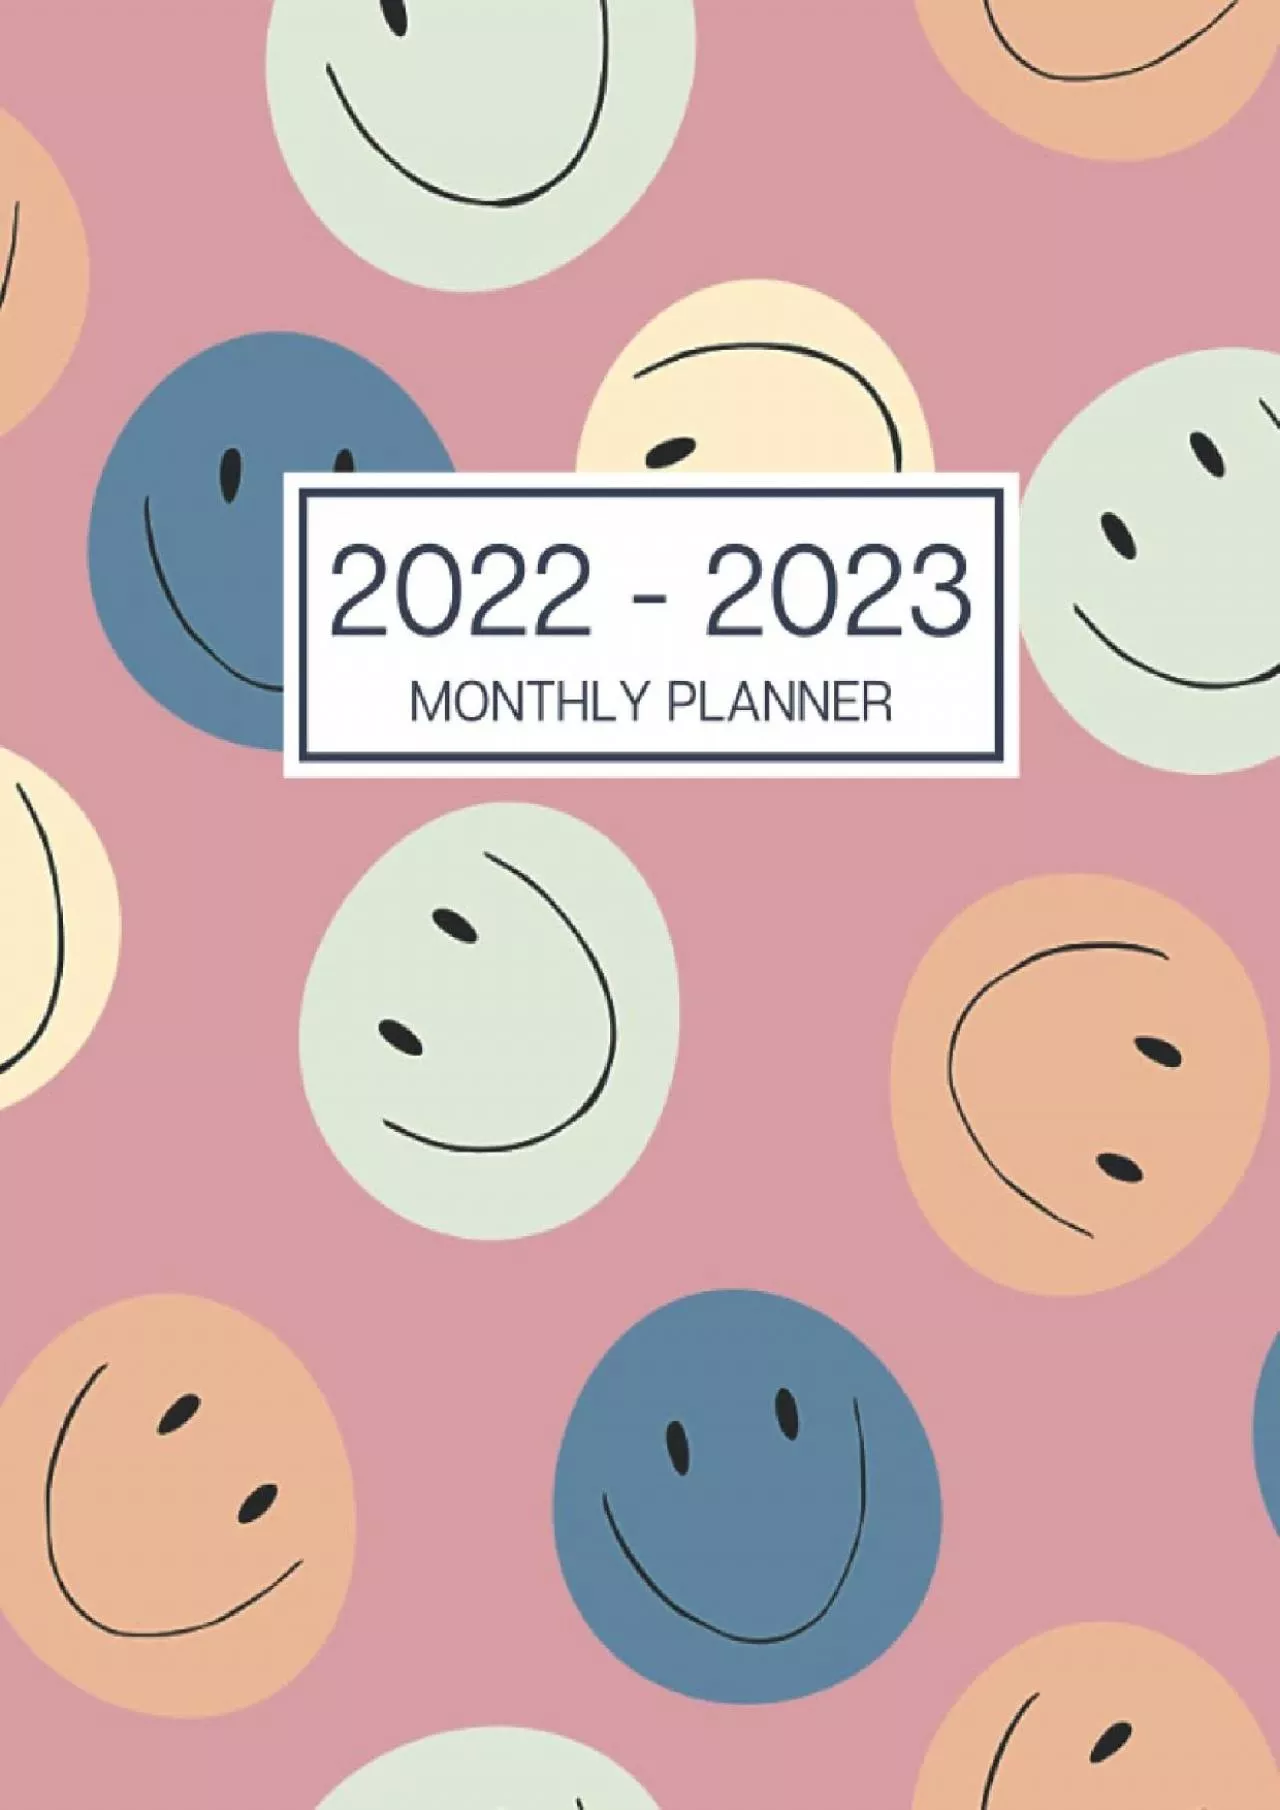 [READING BOOK]-2022-2023 Monthly Planner: Large 2 Year Calendar Planner. Yearly At A Glance